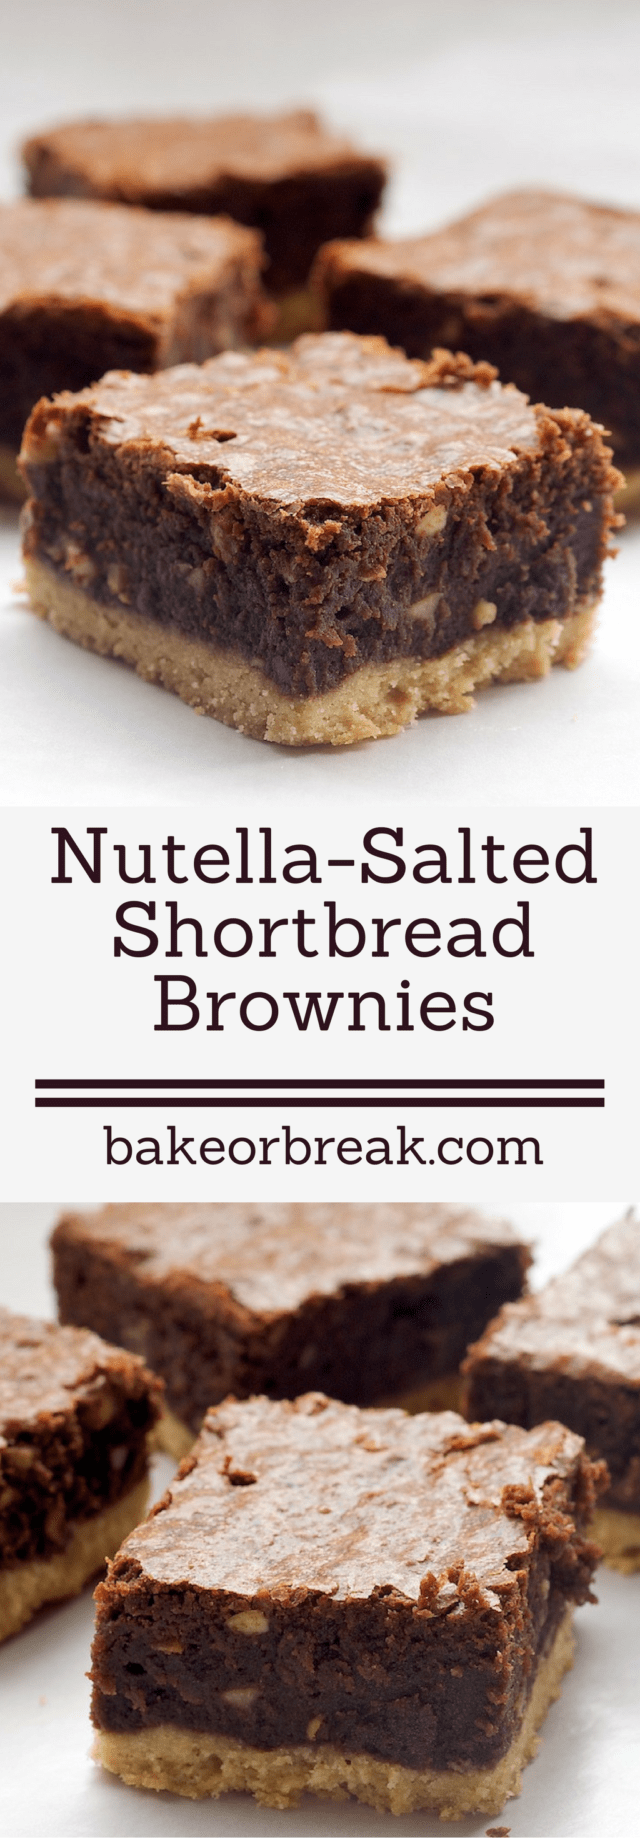 Nutella-salted shortbread brownies on a countertop.